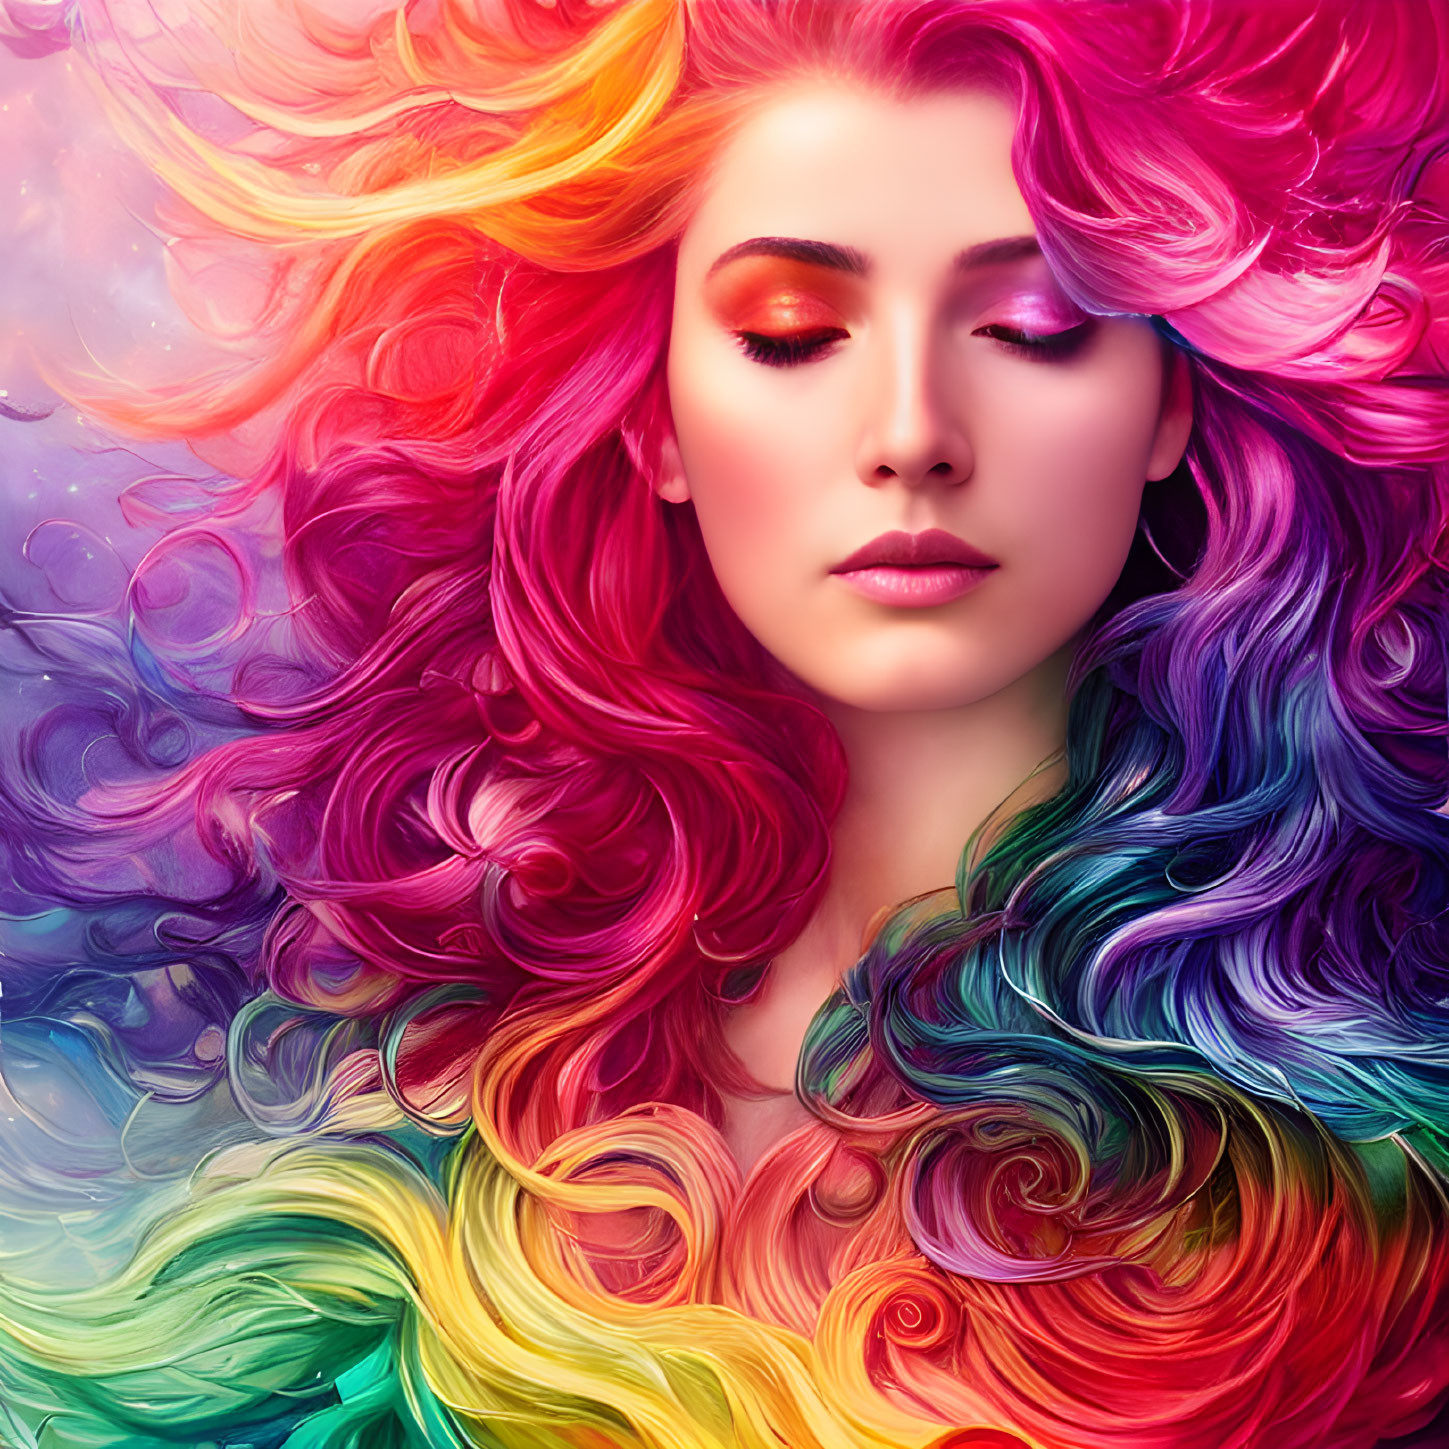 Colorful Woman with Rainbow Hair on Kaleidoscopic Background